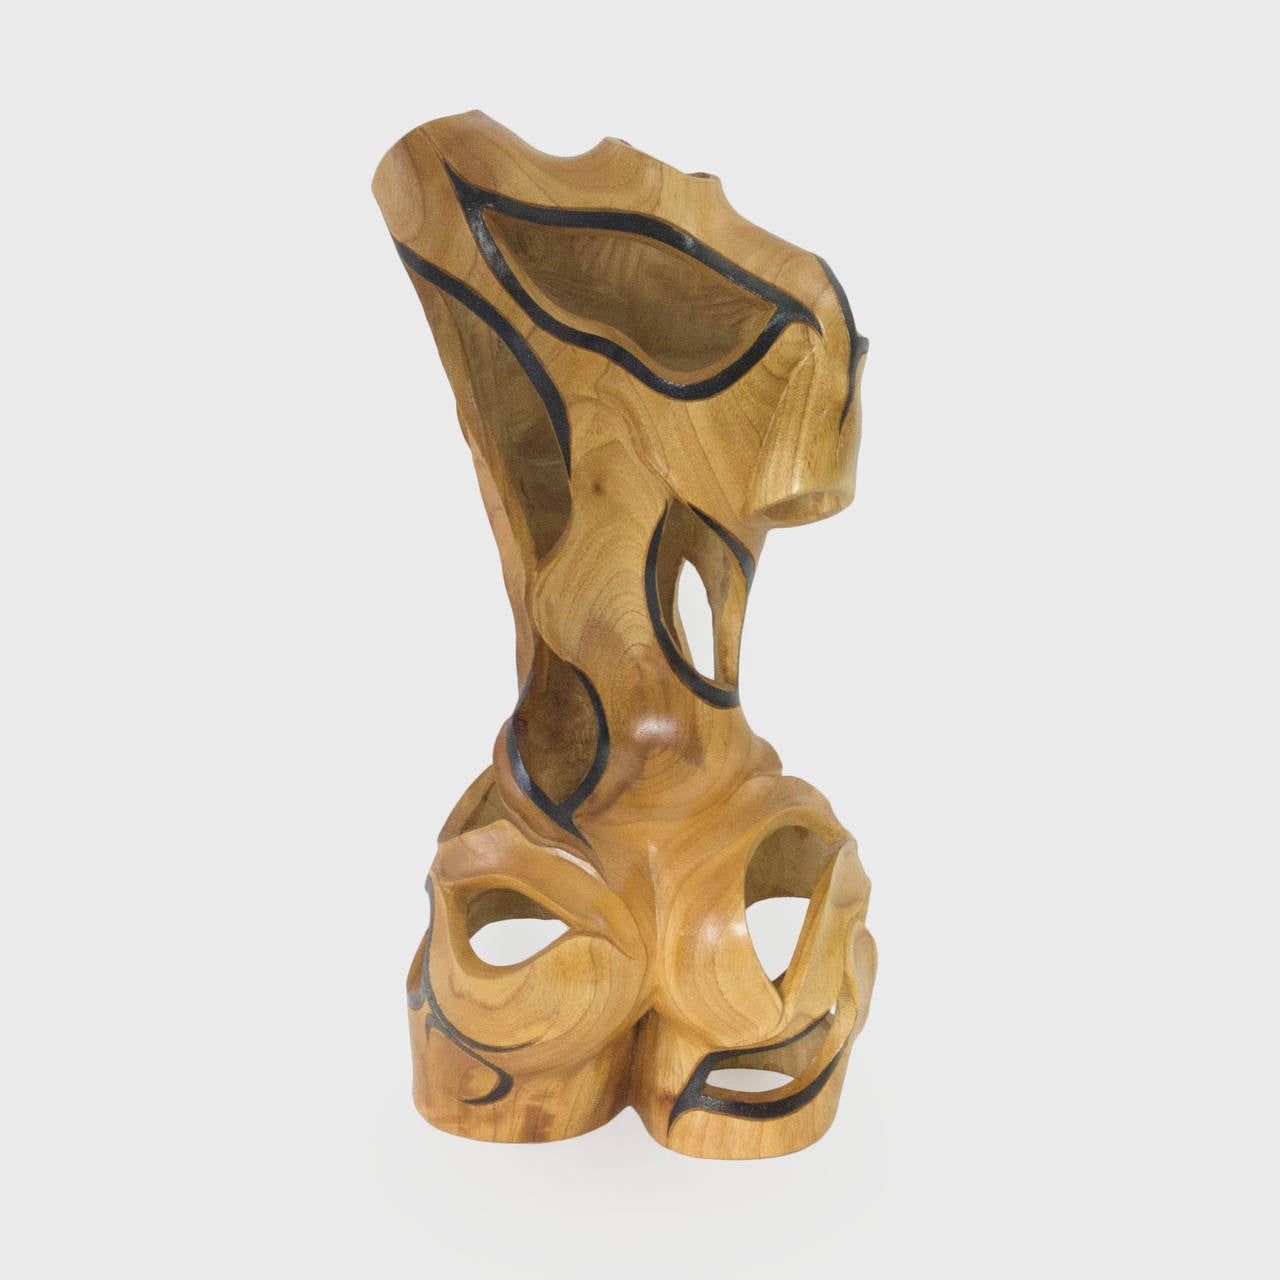 Beautifully executed wood sculpture of the nude female torso handcrafted. Dimensions: 19.0ʺ H × 9.0ʺ W × 6.0ʺ D. Sensational! Please see our companion piece the nude male torso. Simply sensational!